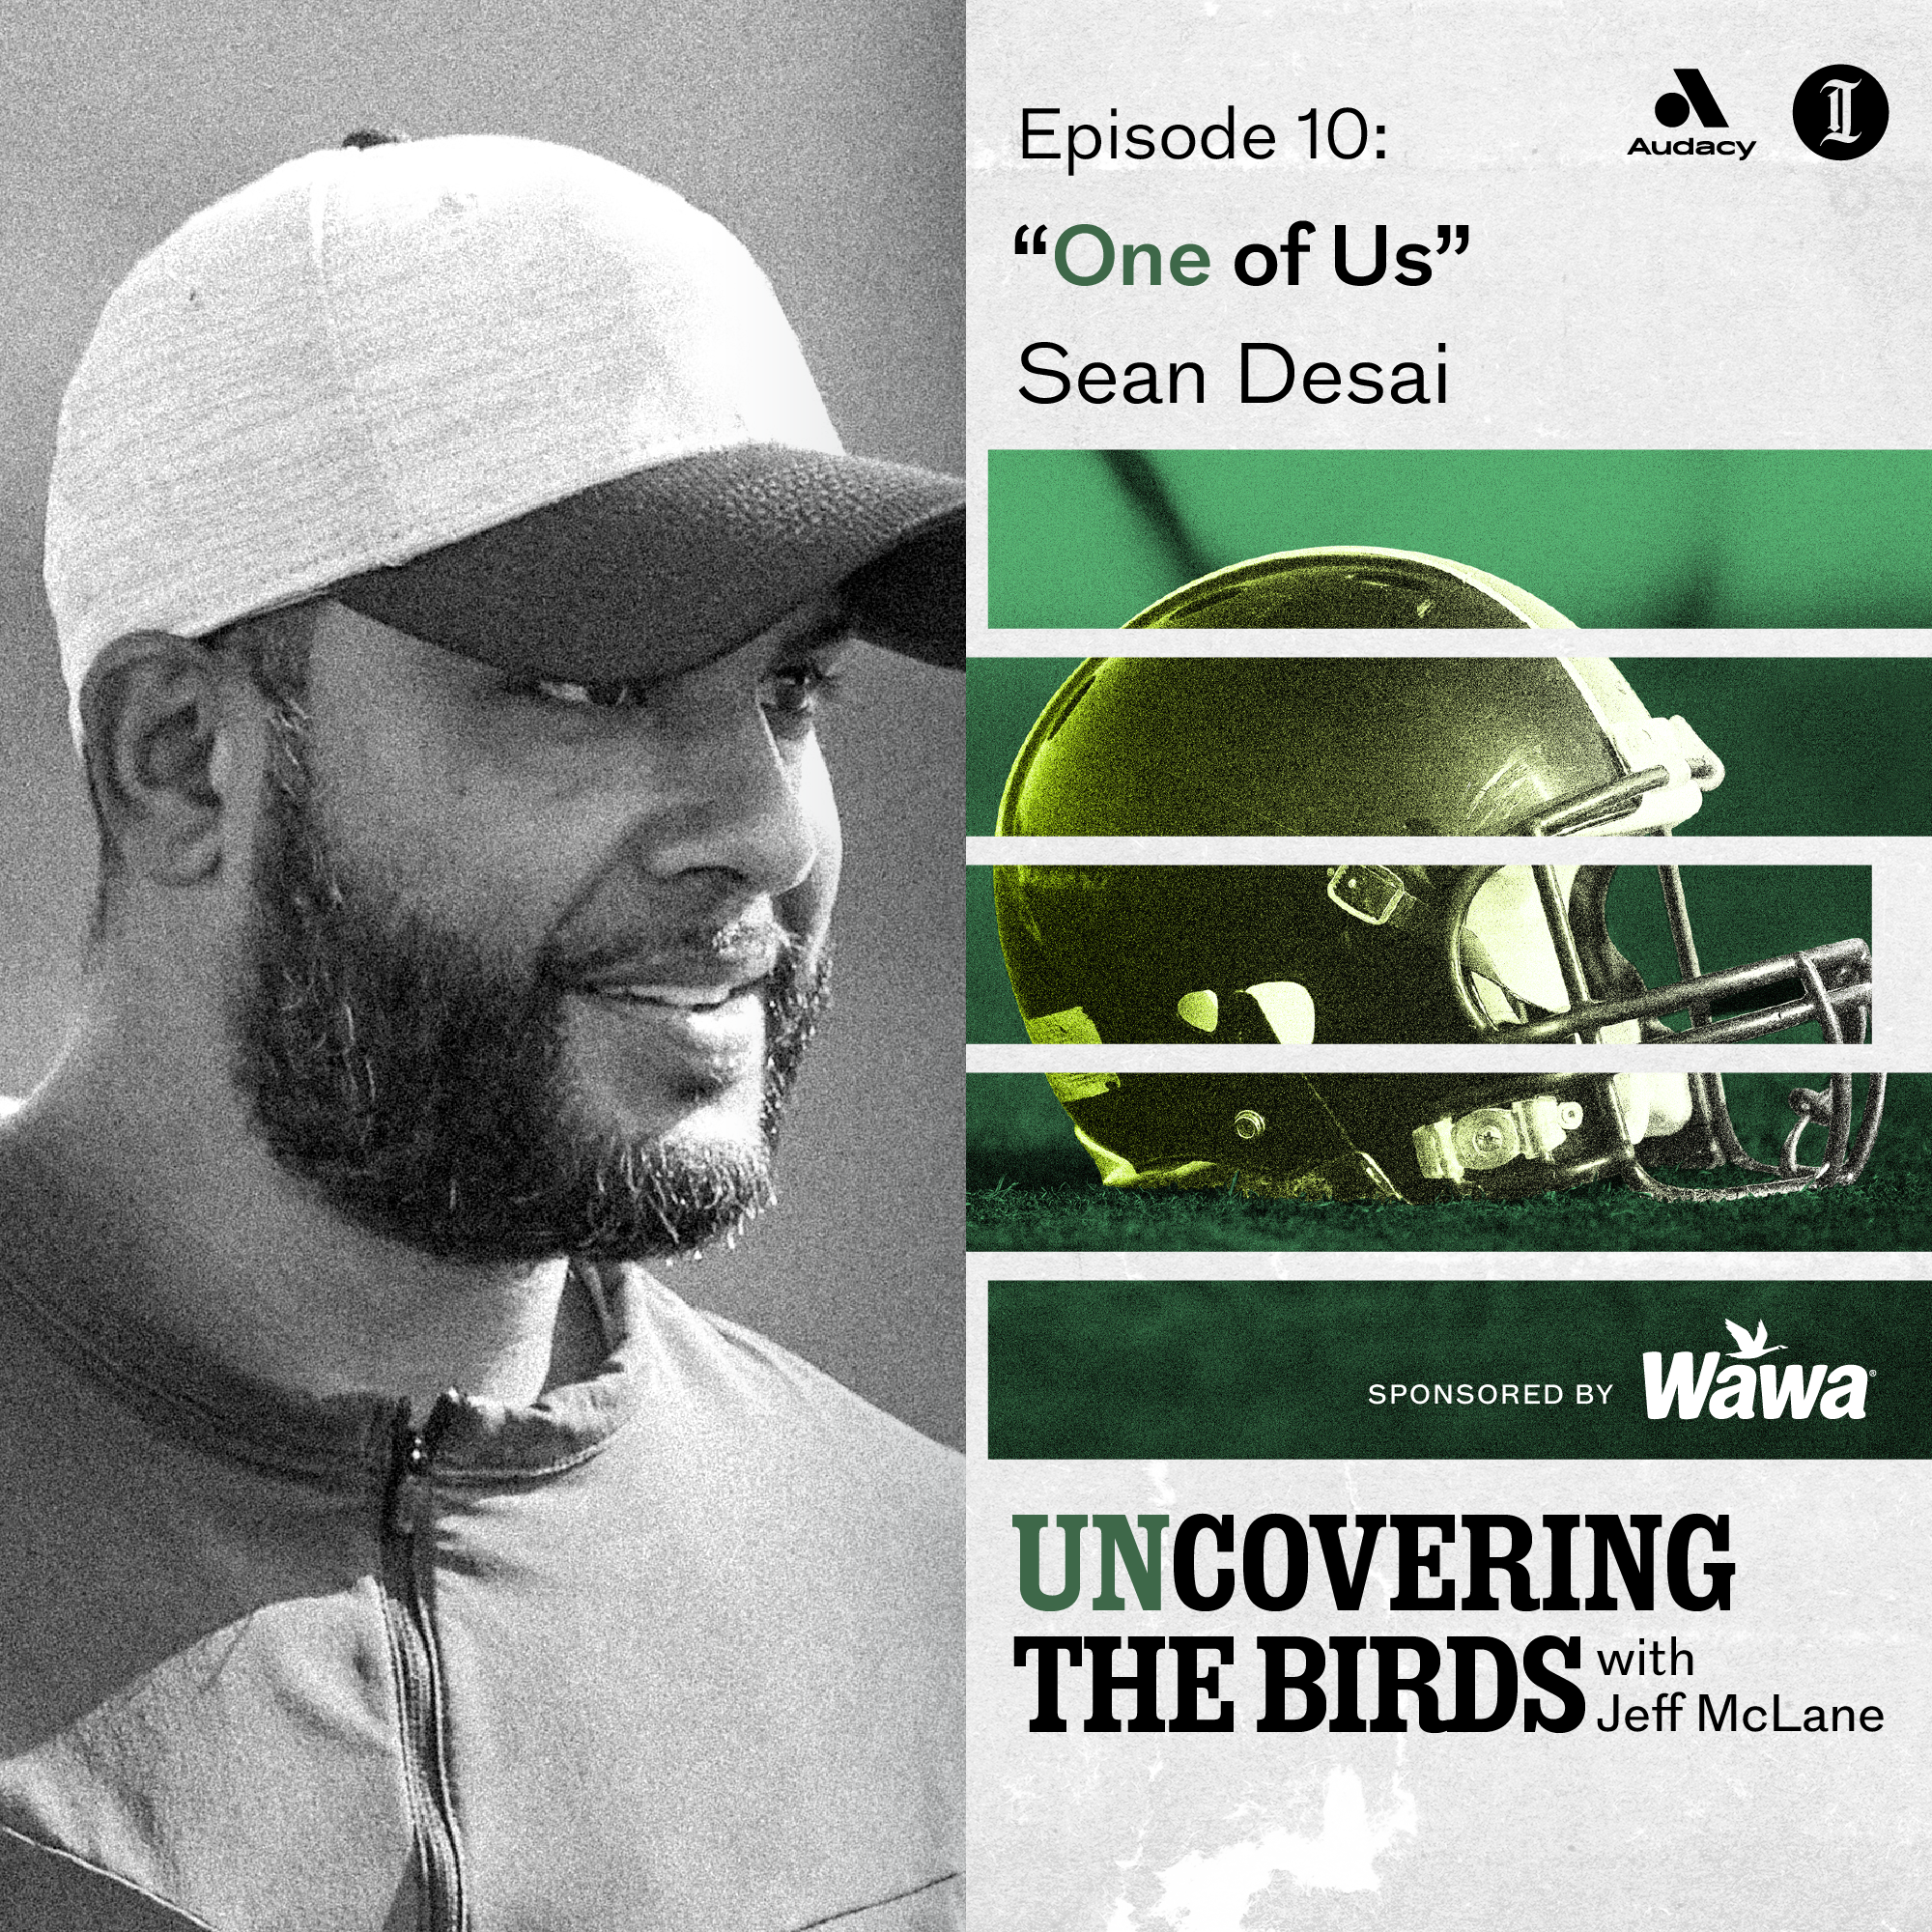 unCovering the Birds': The new face of the franchise